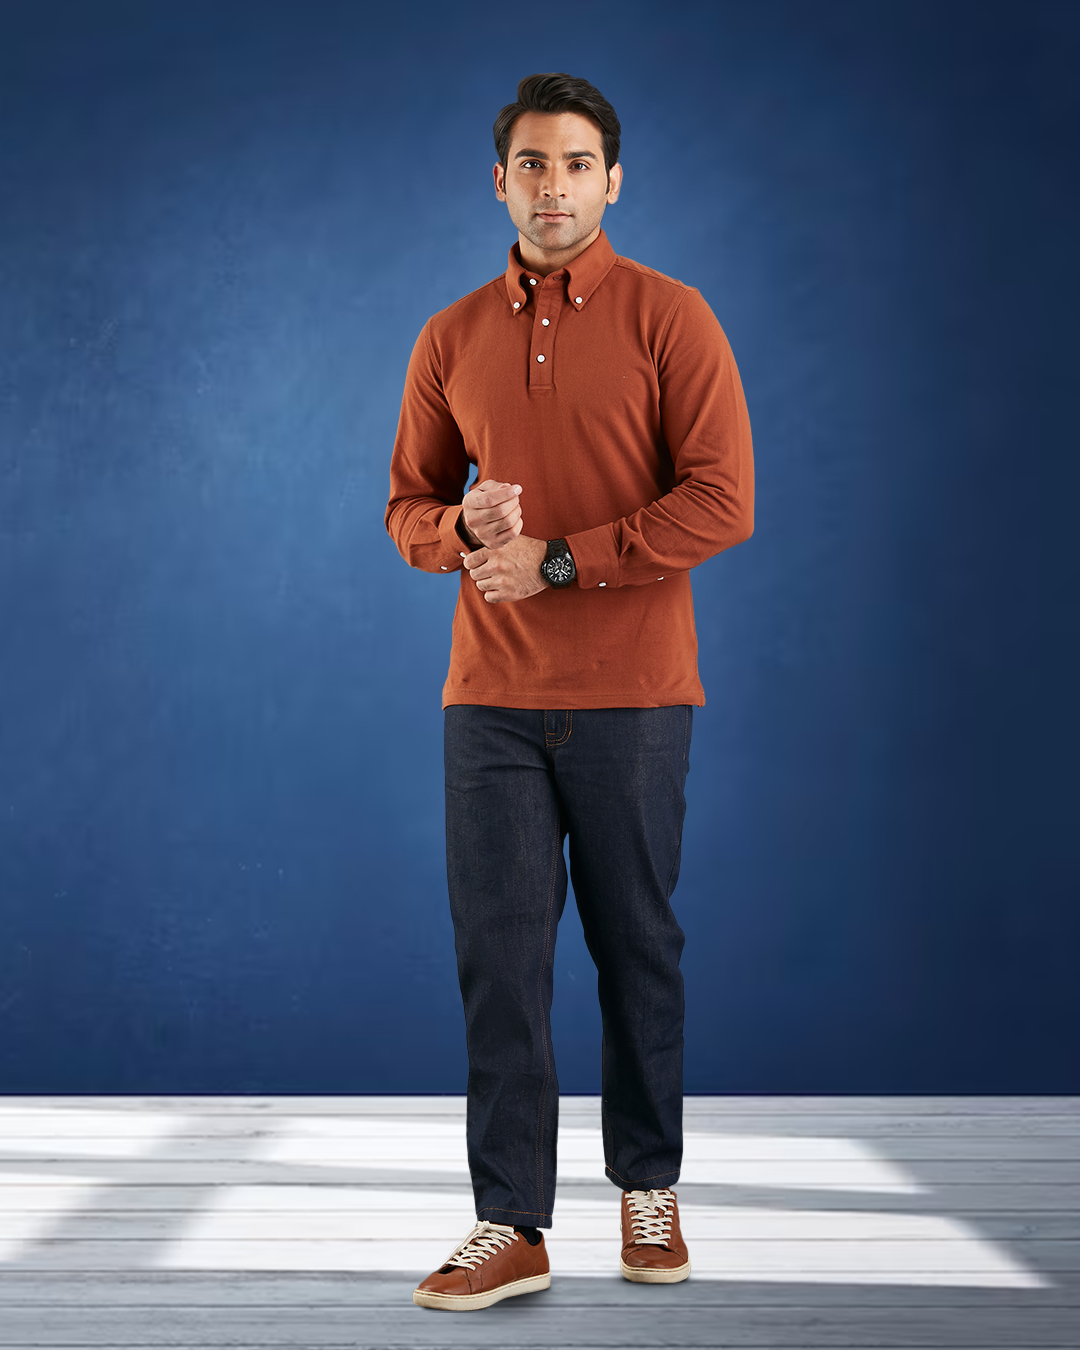 Model wearing the custom oxford polo shirt for men by Luxire in copper hands together with blue background